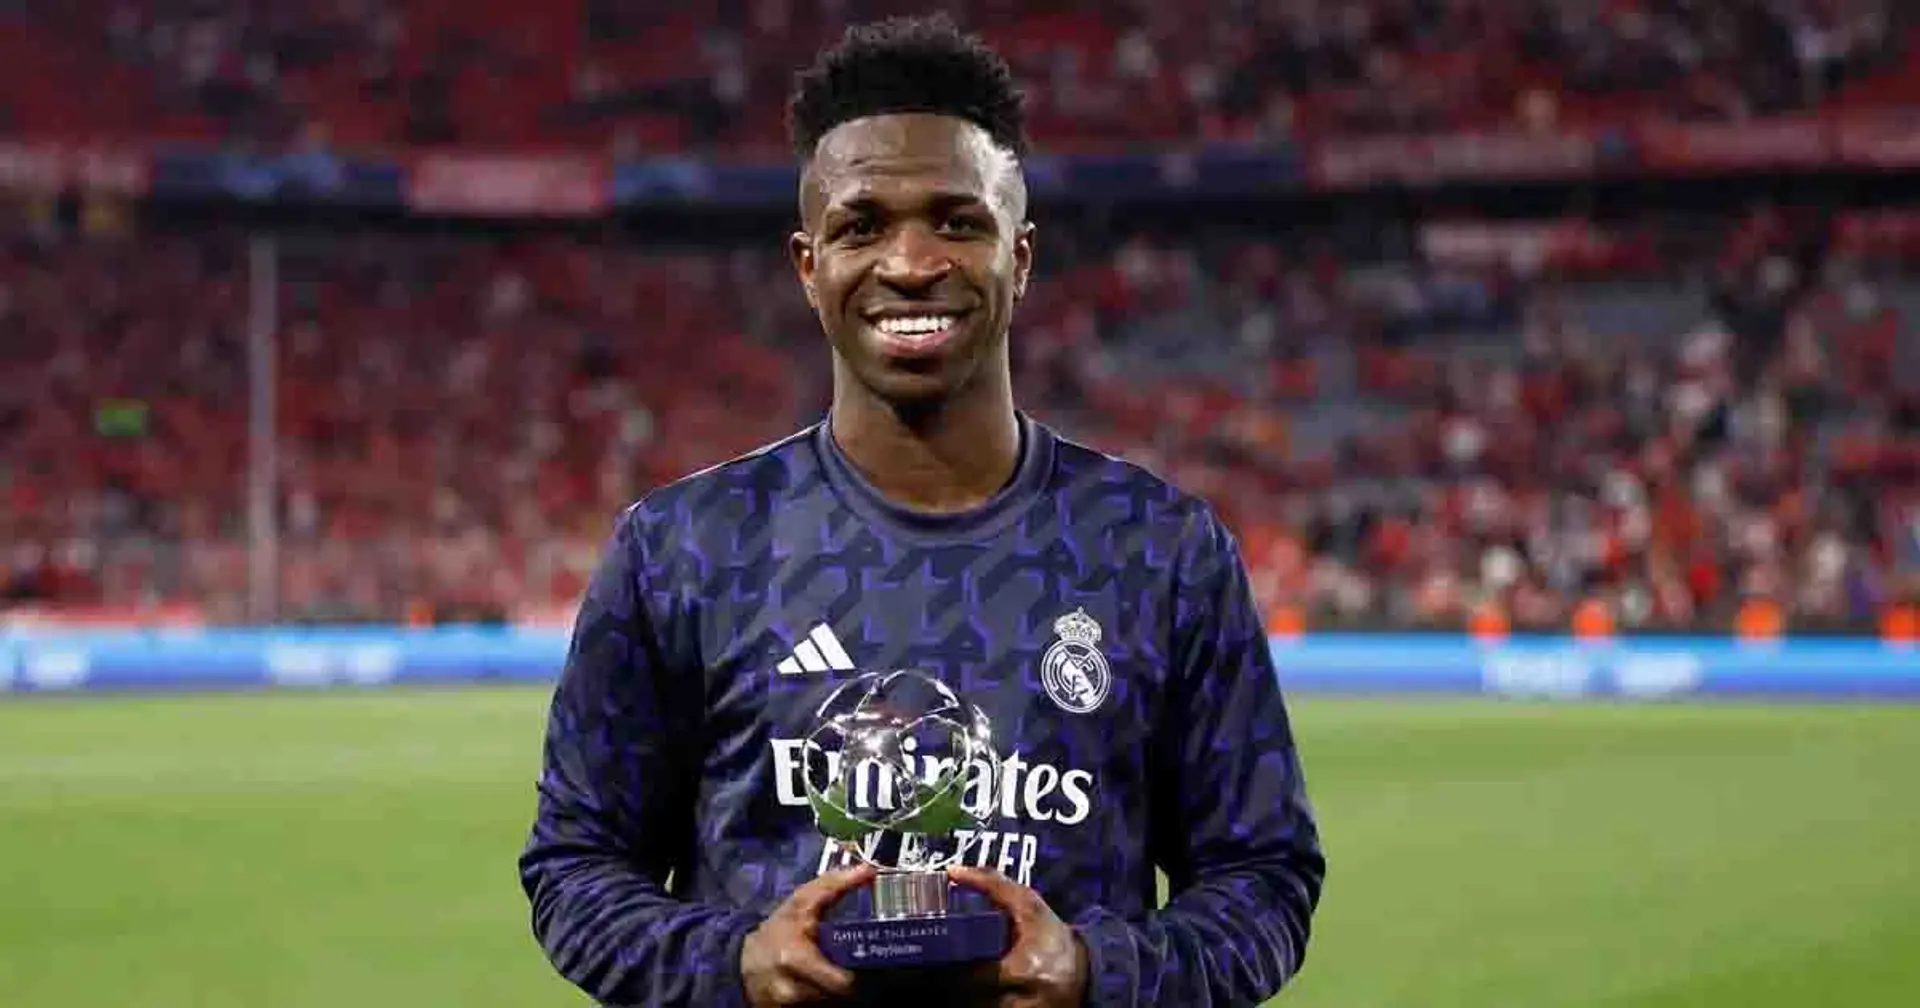 Real Madrid 'begin campaign' to help Vini Jr win Ballon d'Or